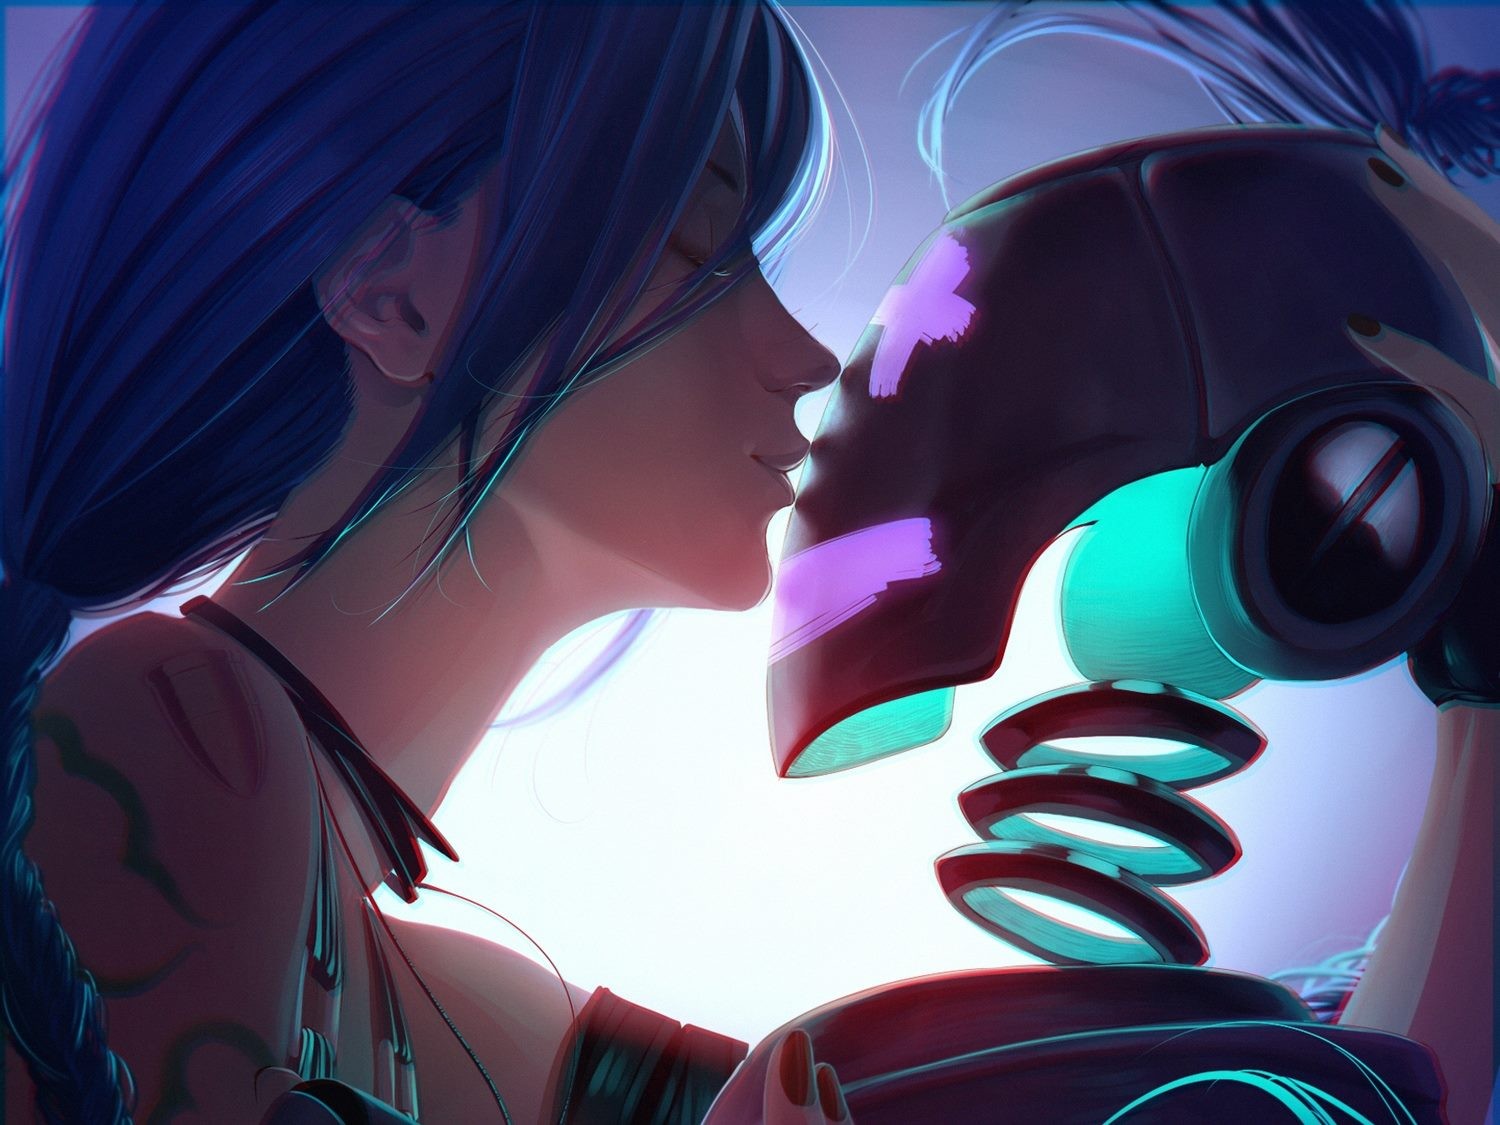 Anime 1500x1125 anime anime girls video games blue hair long hair Jinx (League of Legends) League of Legends video game characters face profile video game girls PC gaming kissing closed eyes